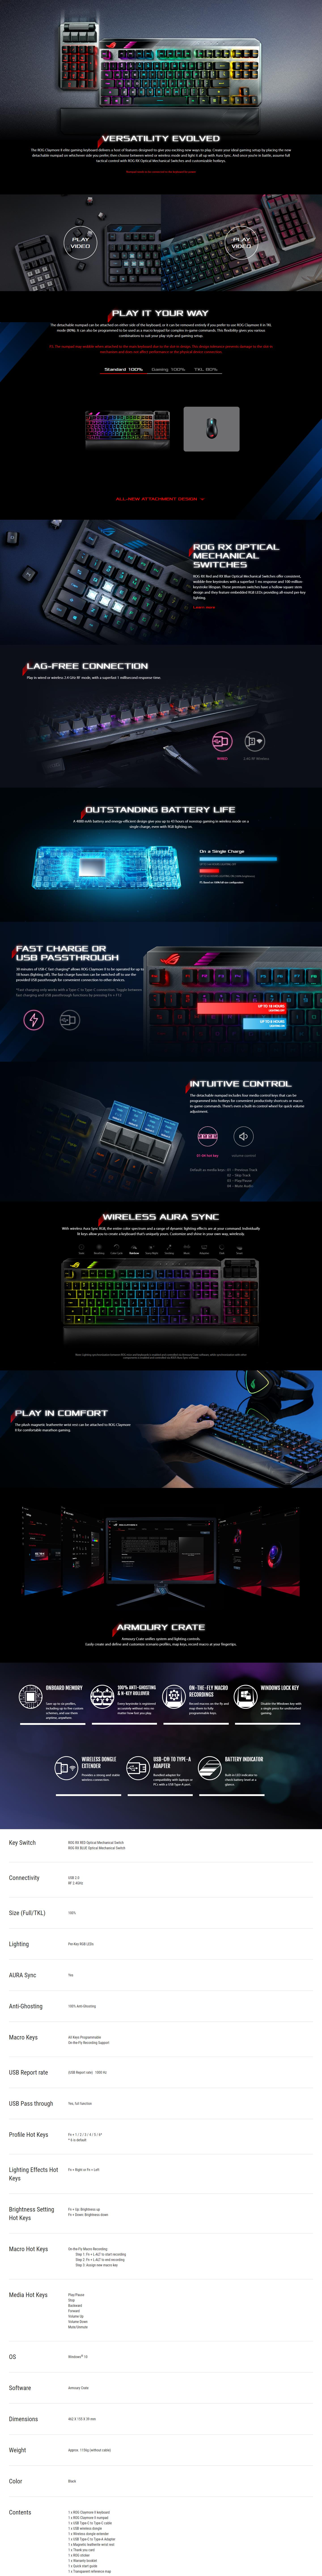 A large marketing image providing additional information about the product ASUS ROG Claymore TKL 80%/100% Wireless Mechanical Gaming Keyboard - ROG RX Red - Additional alt info not provided